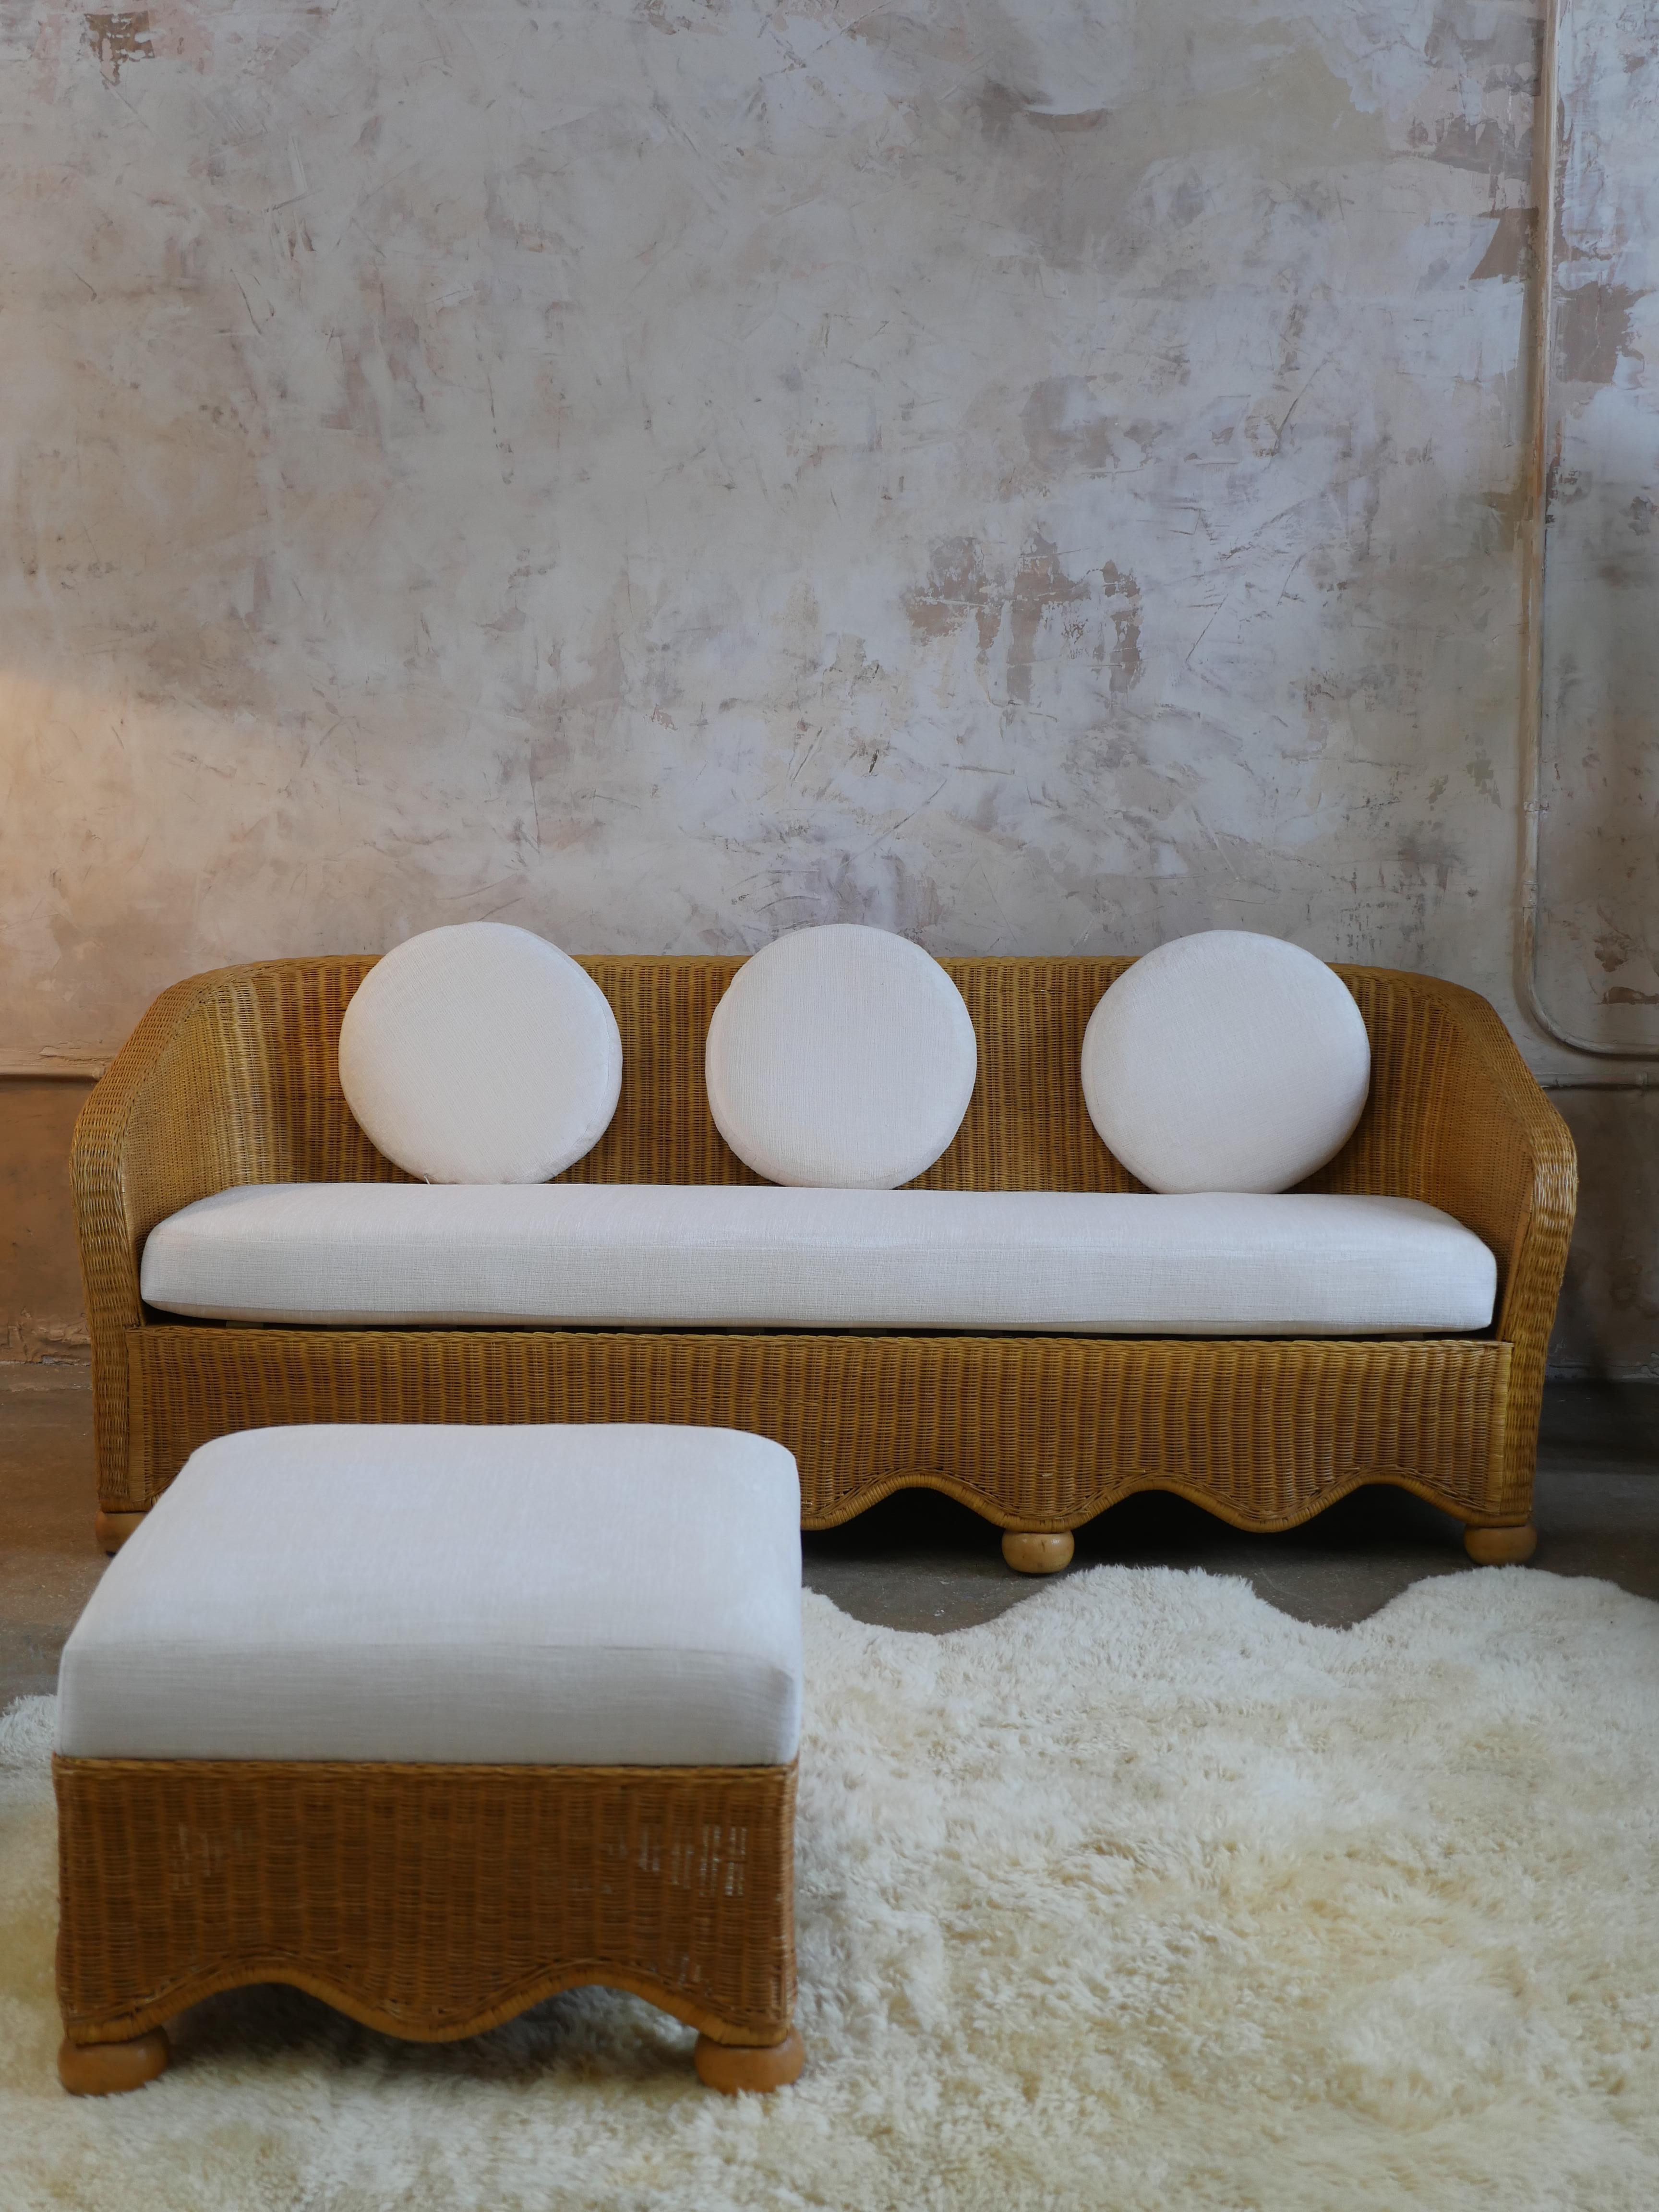 Introducing our 1980s rattan scalloped sofa with wooden ball feet which has been beautifully reimagined with new Holly Hunt off-white chenille fabric, giving the sofa a true embodiment of vintage elegance and refined taste. We've taken great care to